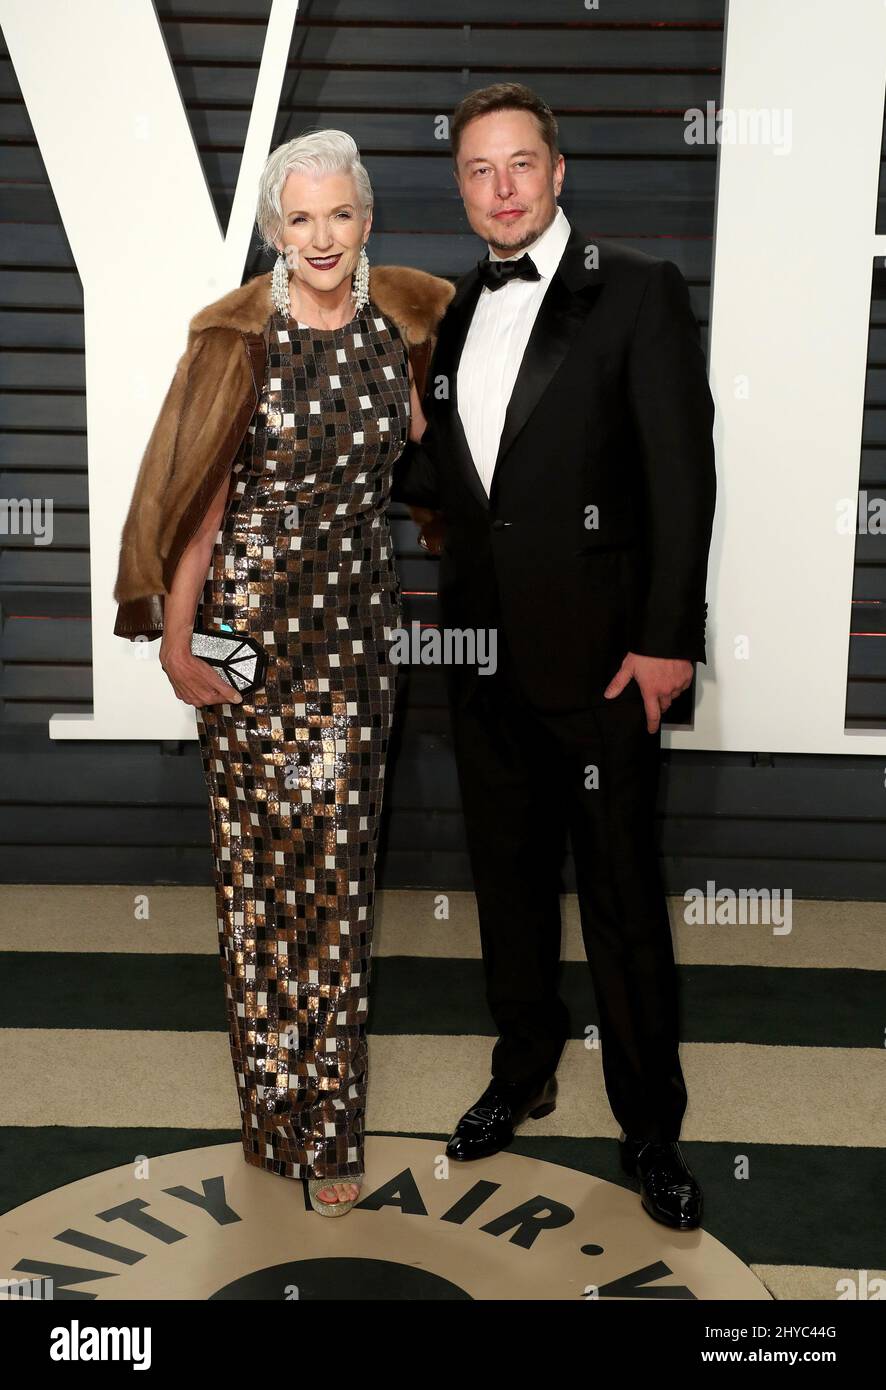 Maye Musk and Elon Musk at 2017 Vanity Fair Oscar Party hosted by Graydon Carter at the Wallis Annenberg Center for the Performing Arts Stock Photo